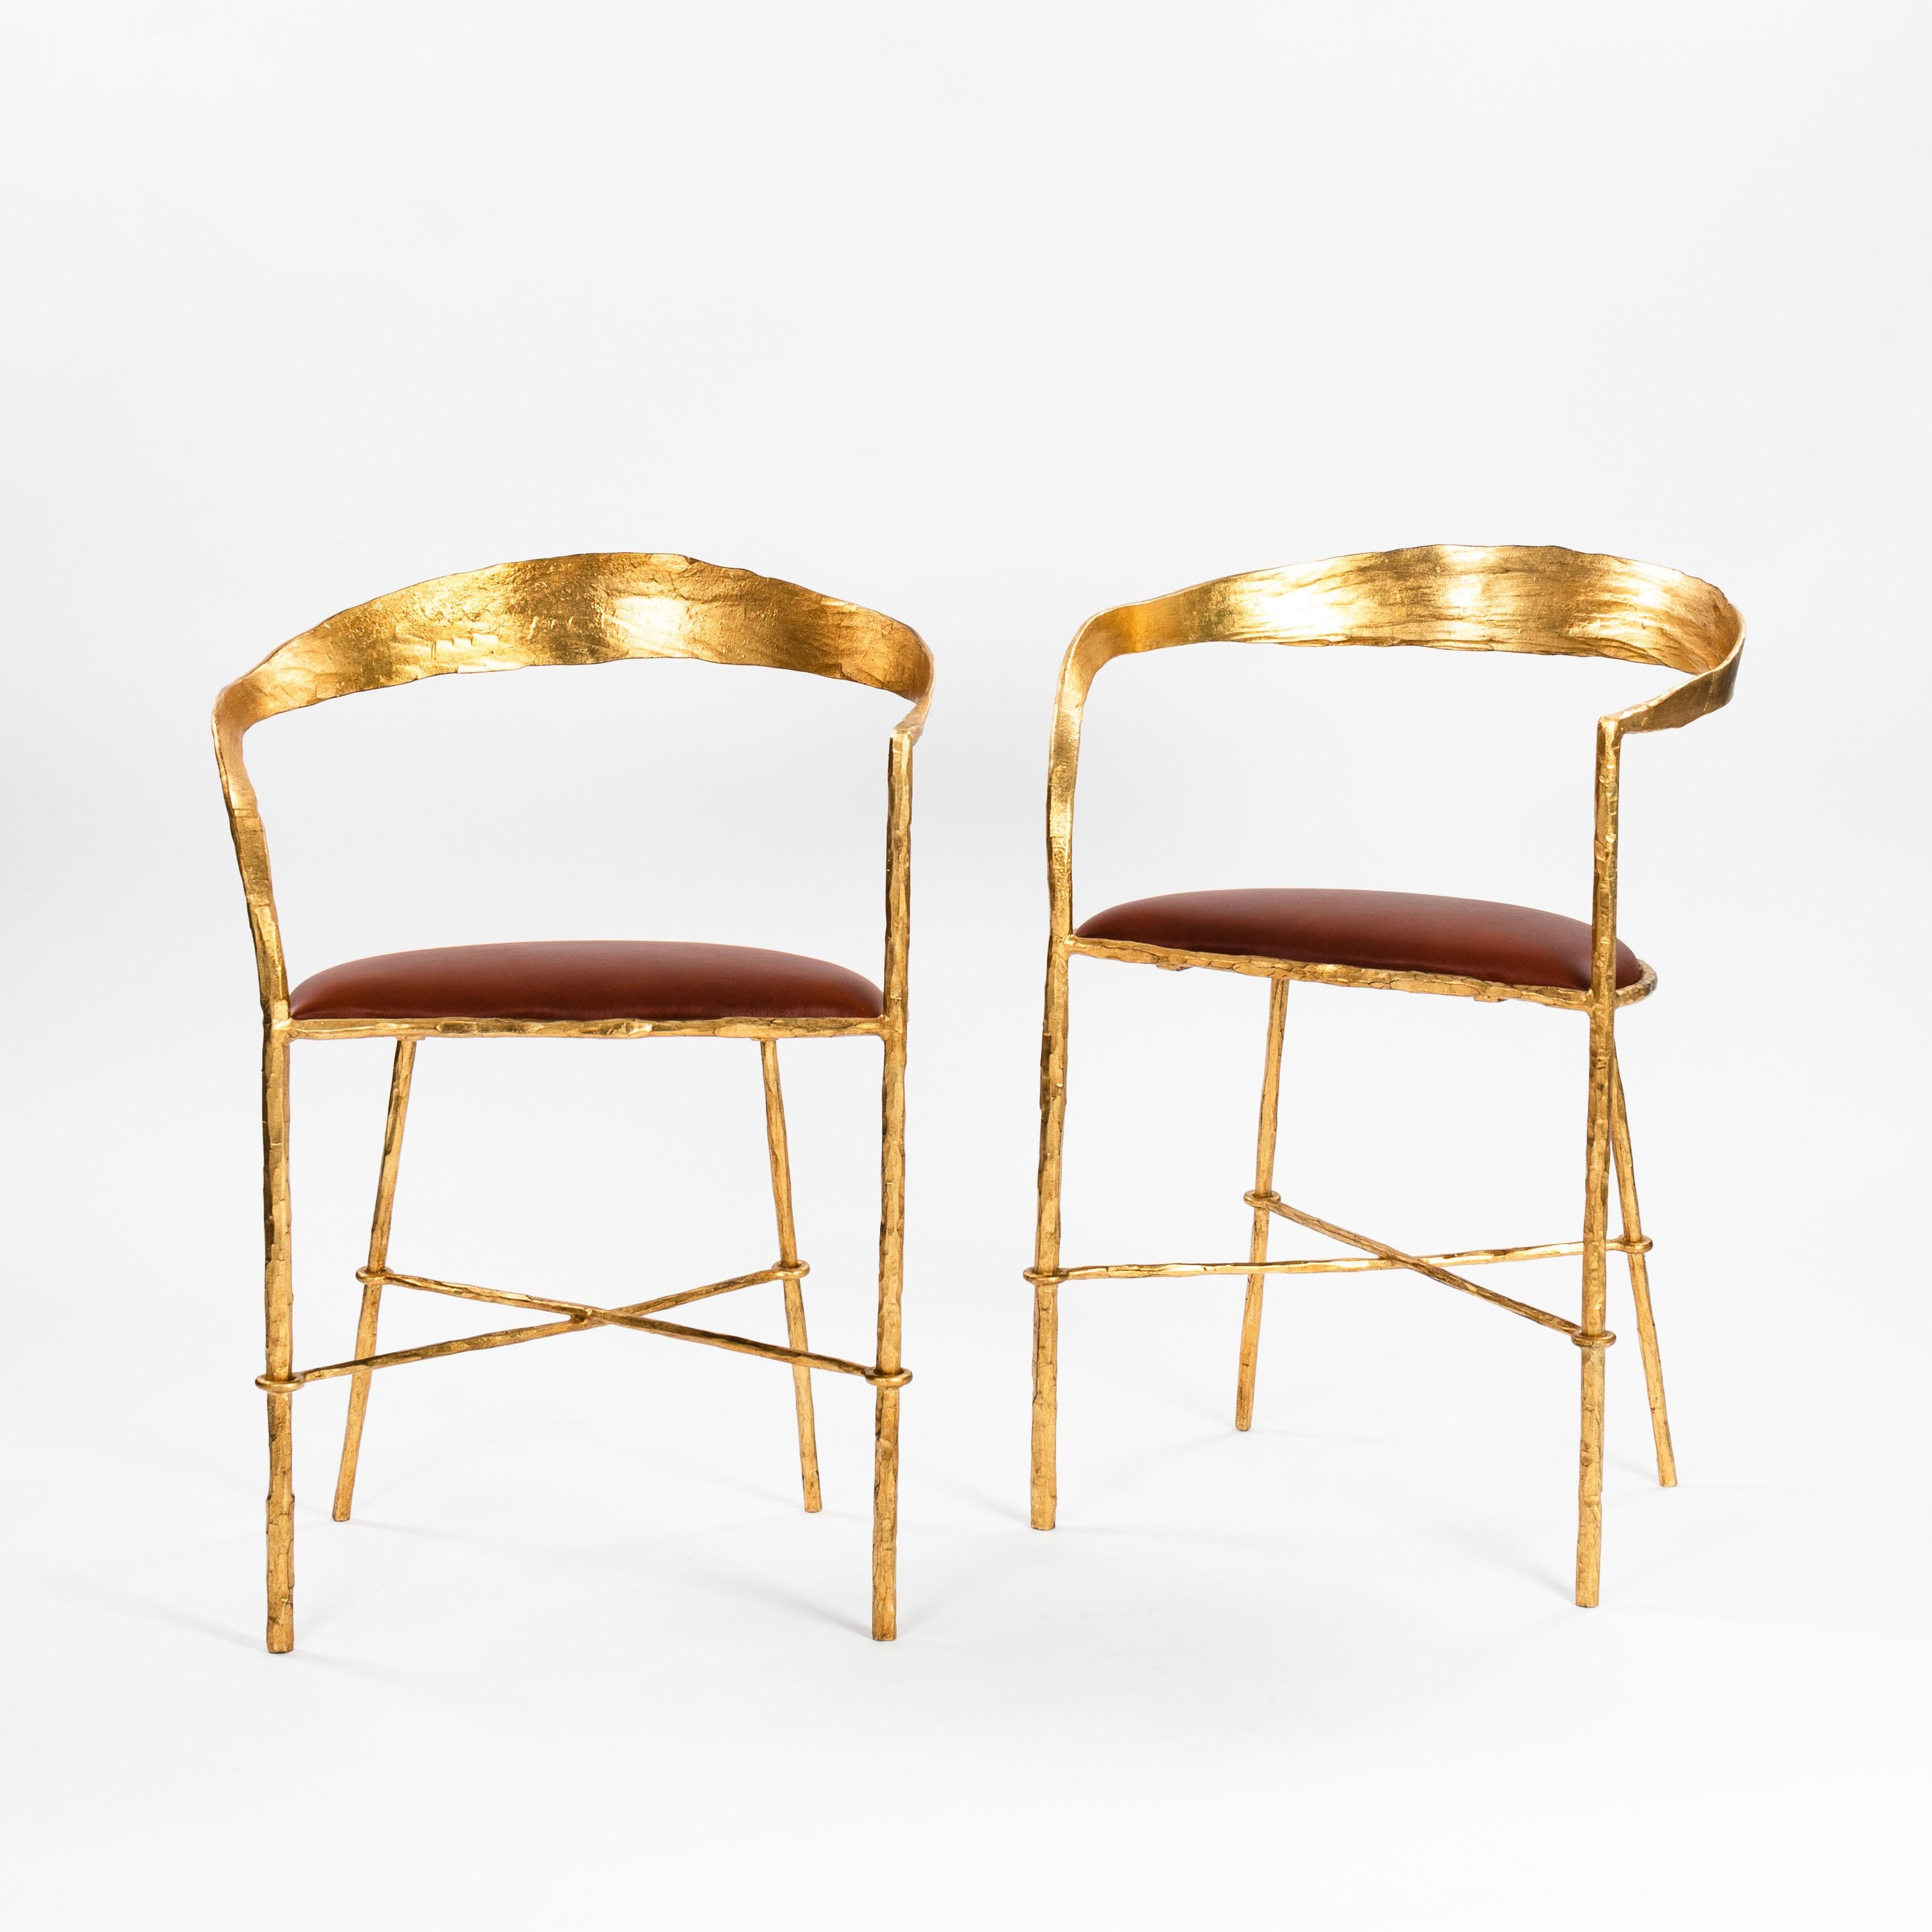 Pair of hand forged gold plated mid-century chairs by Banci Florence 1970s

The chairs are delicate in structure but very heavy.
One arm chord is curved the other goes straight into the backrest. 
The frame is ground flat to create an almost angular